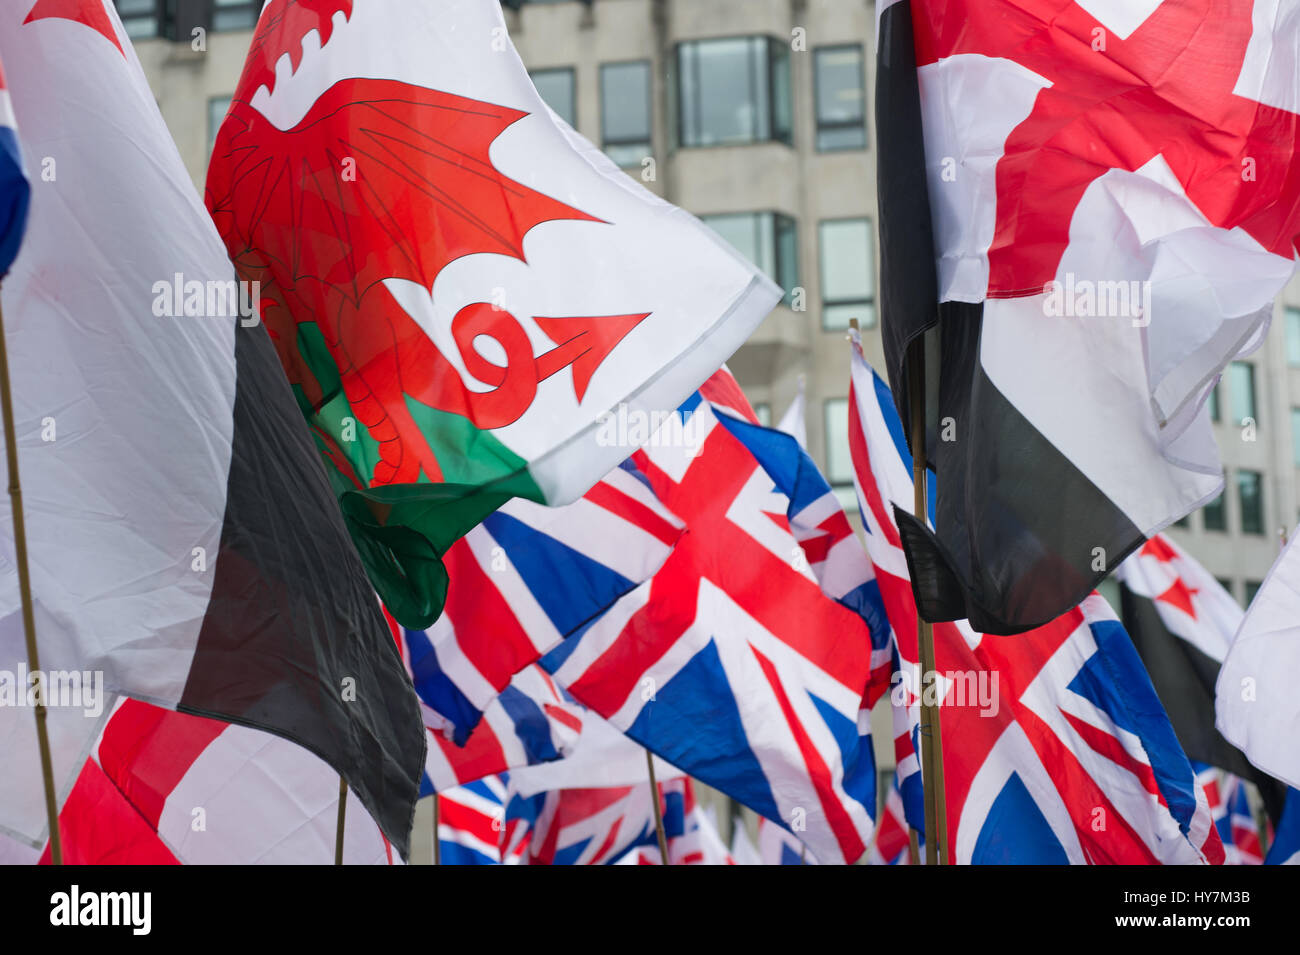 London, UK. 1st April, 2017.  The English Defence League (EDL) and Britain First held a protest march through London. The Britain First group were protesting against terrorism in response to the reason terrorist attack in London on March the 22nd 2017. Flags waved during the march. Andrew Steven Graham/Alamy Live News Stock Photo